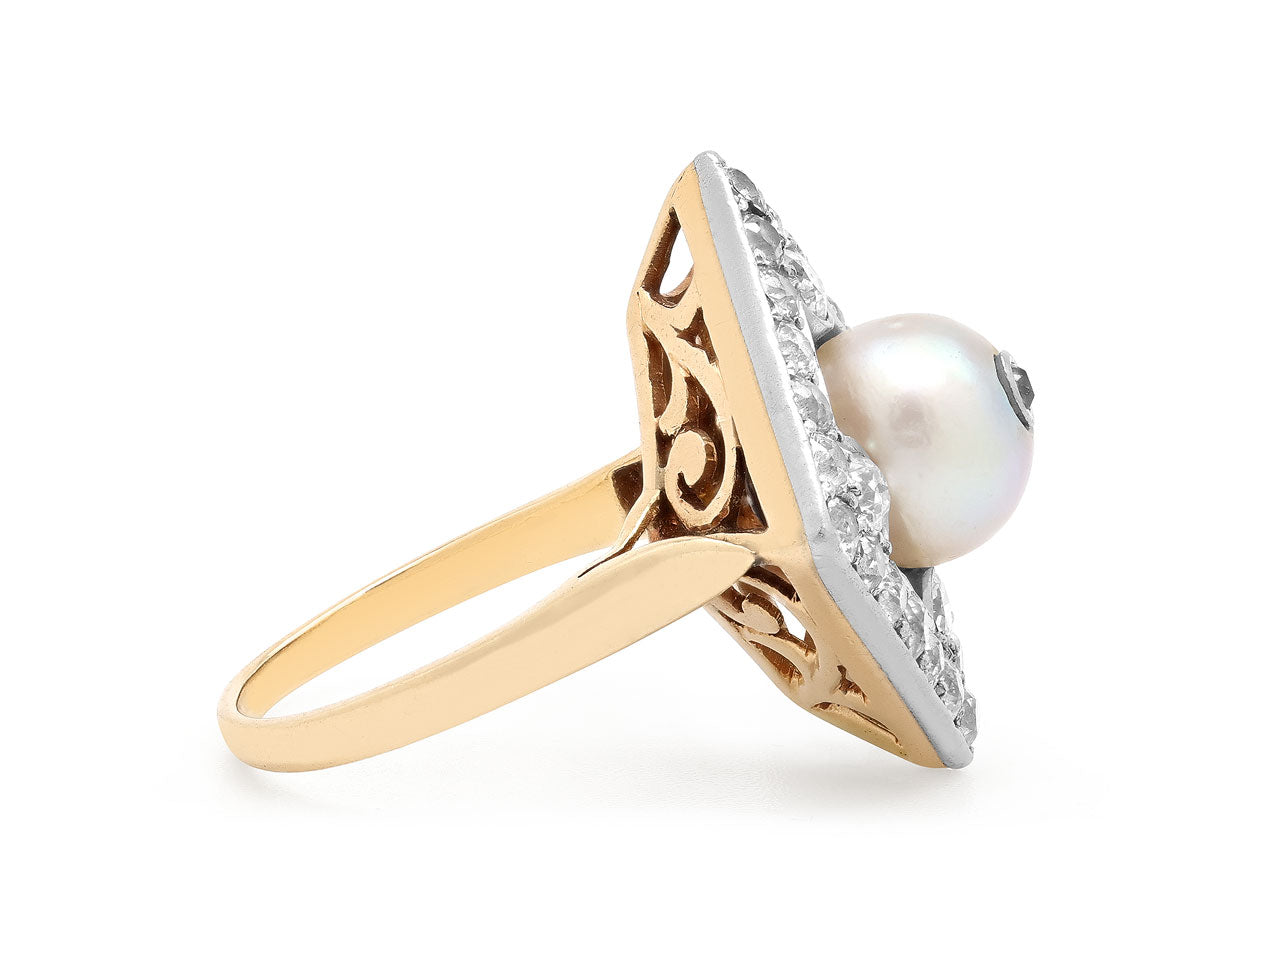 Antique Edwardian Cultured Pearl and Diamond Ring in 14K and Platinum